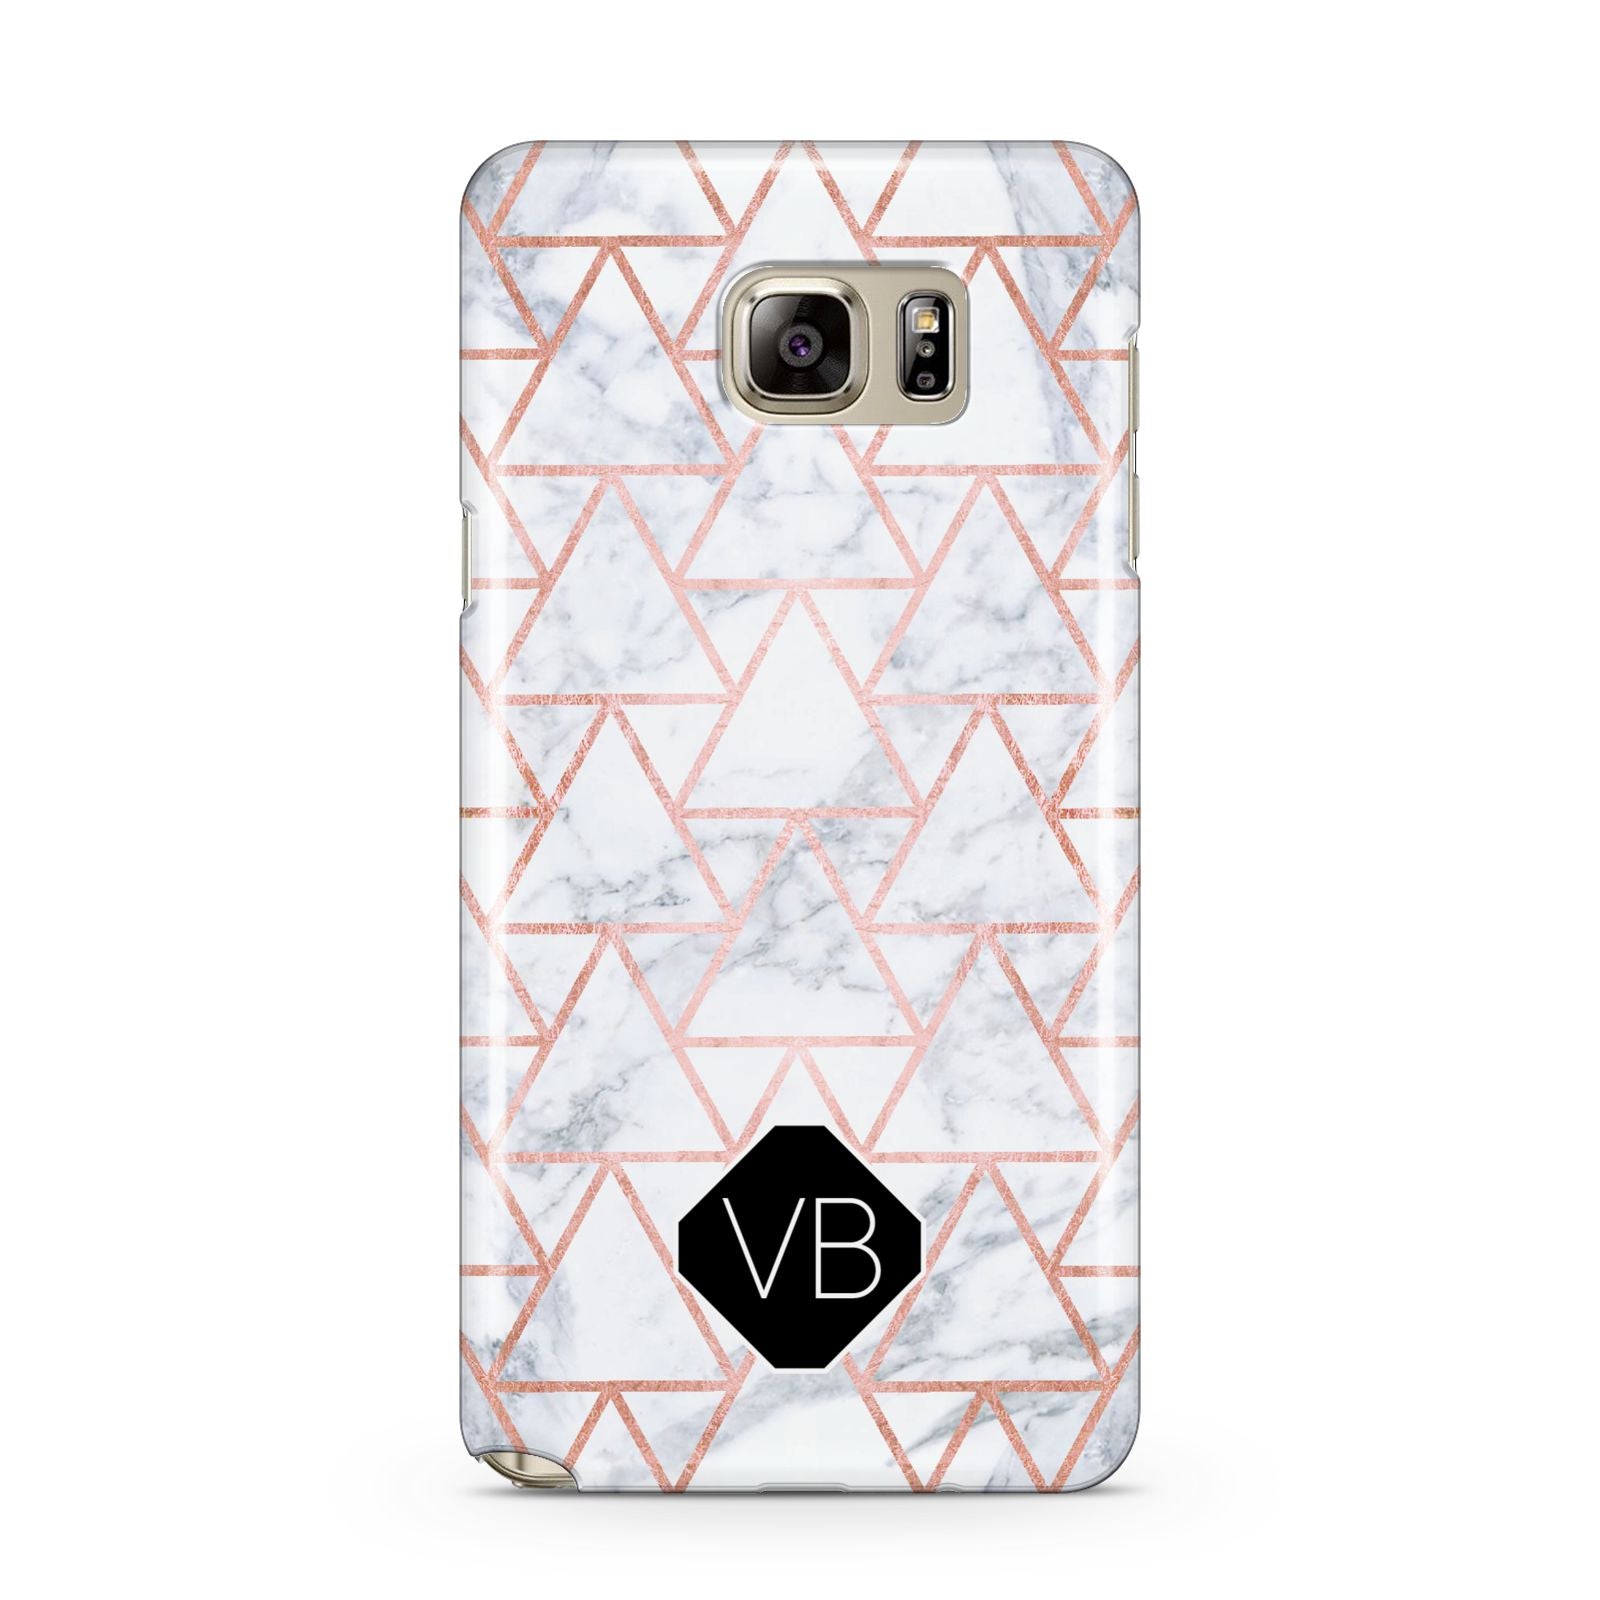 Personalised Rose Gold Grey Marble Hexagon Samsung Galaxy Note 5 Case